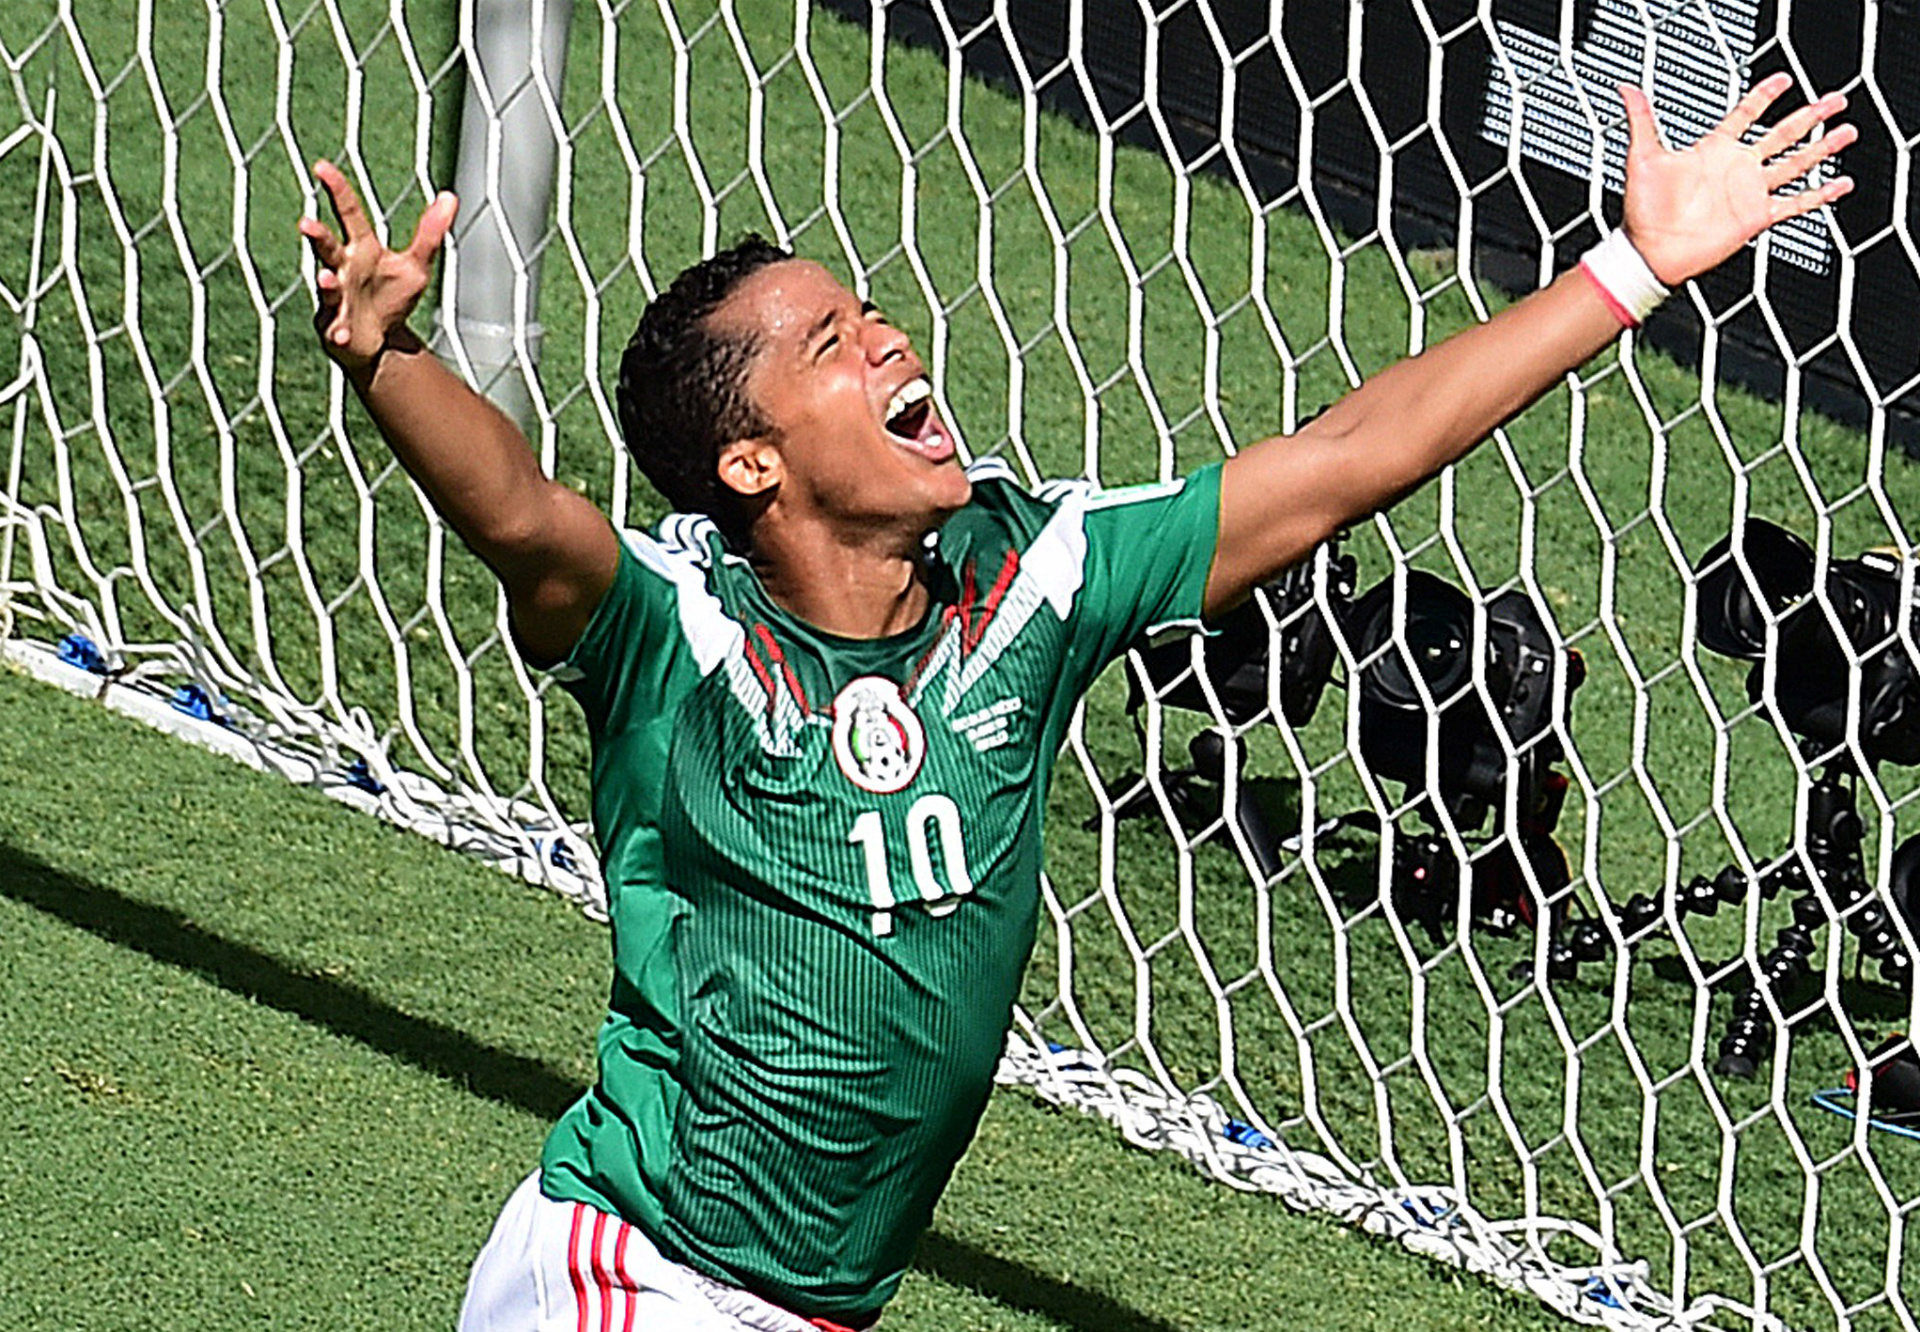 Tom Marshall: The Top 10 Mexican players of 2014 - Giovani dos ...